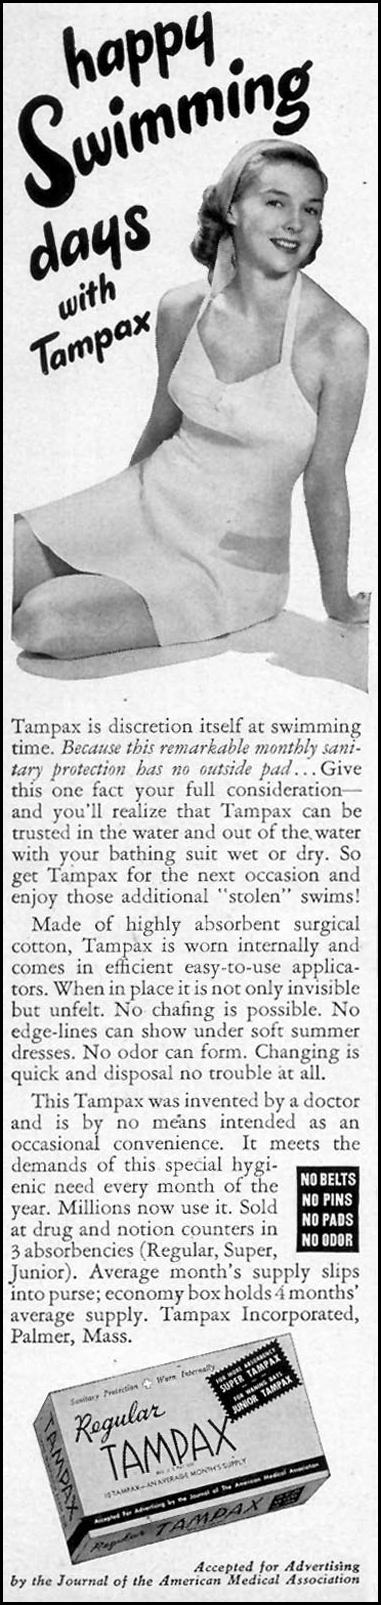 TAMPAX
WOMAN'S DAY
07/01/1949
p. 10